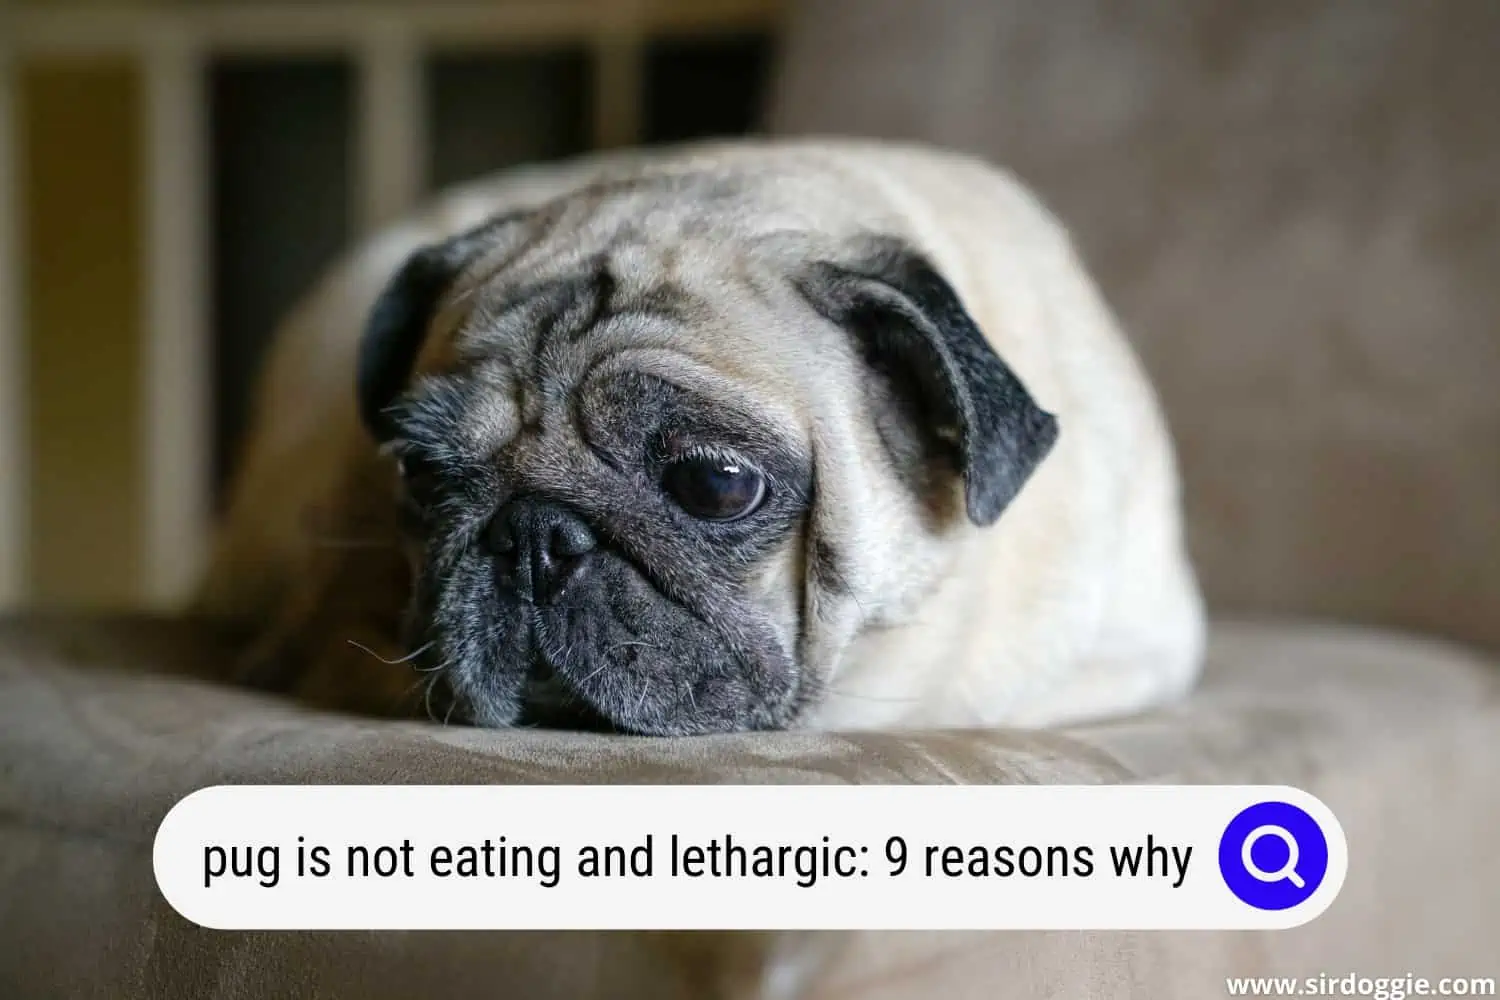 pug not eating and lethargic